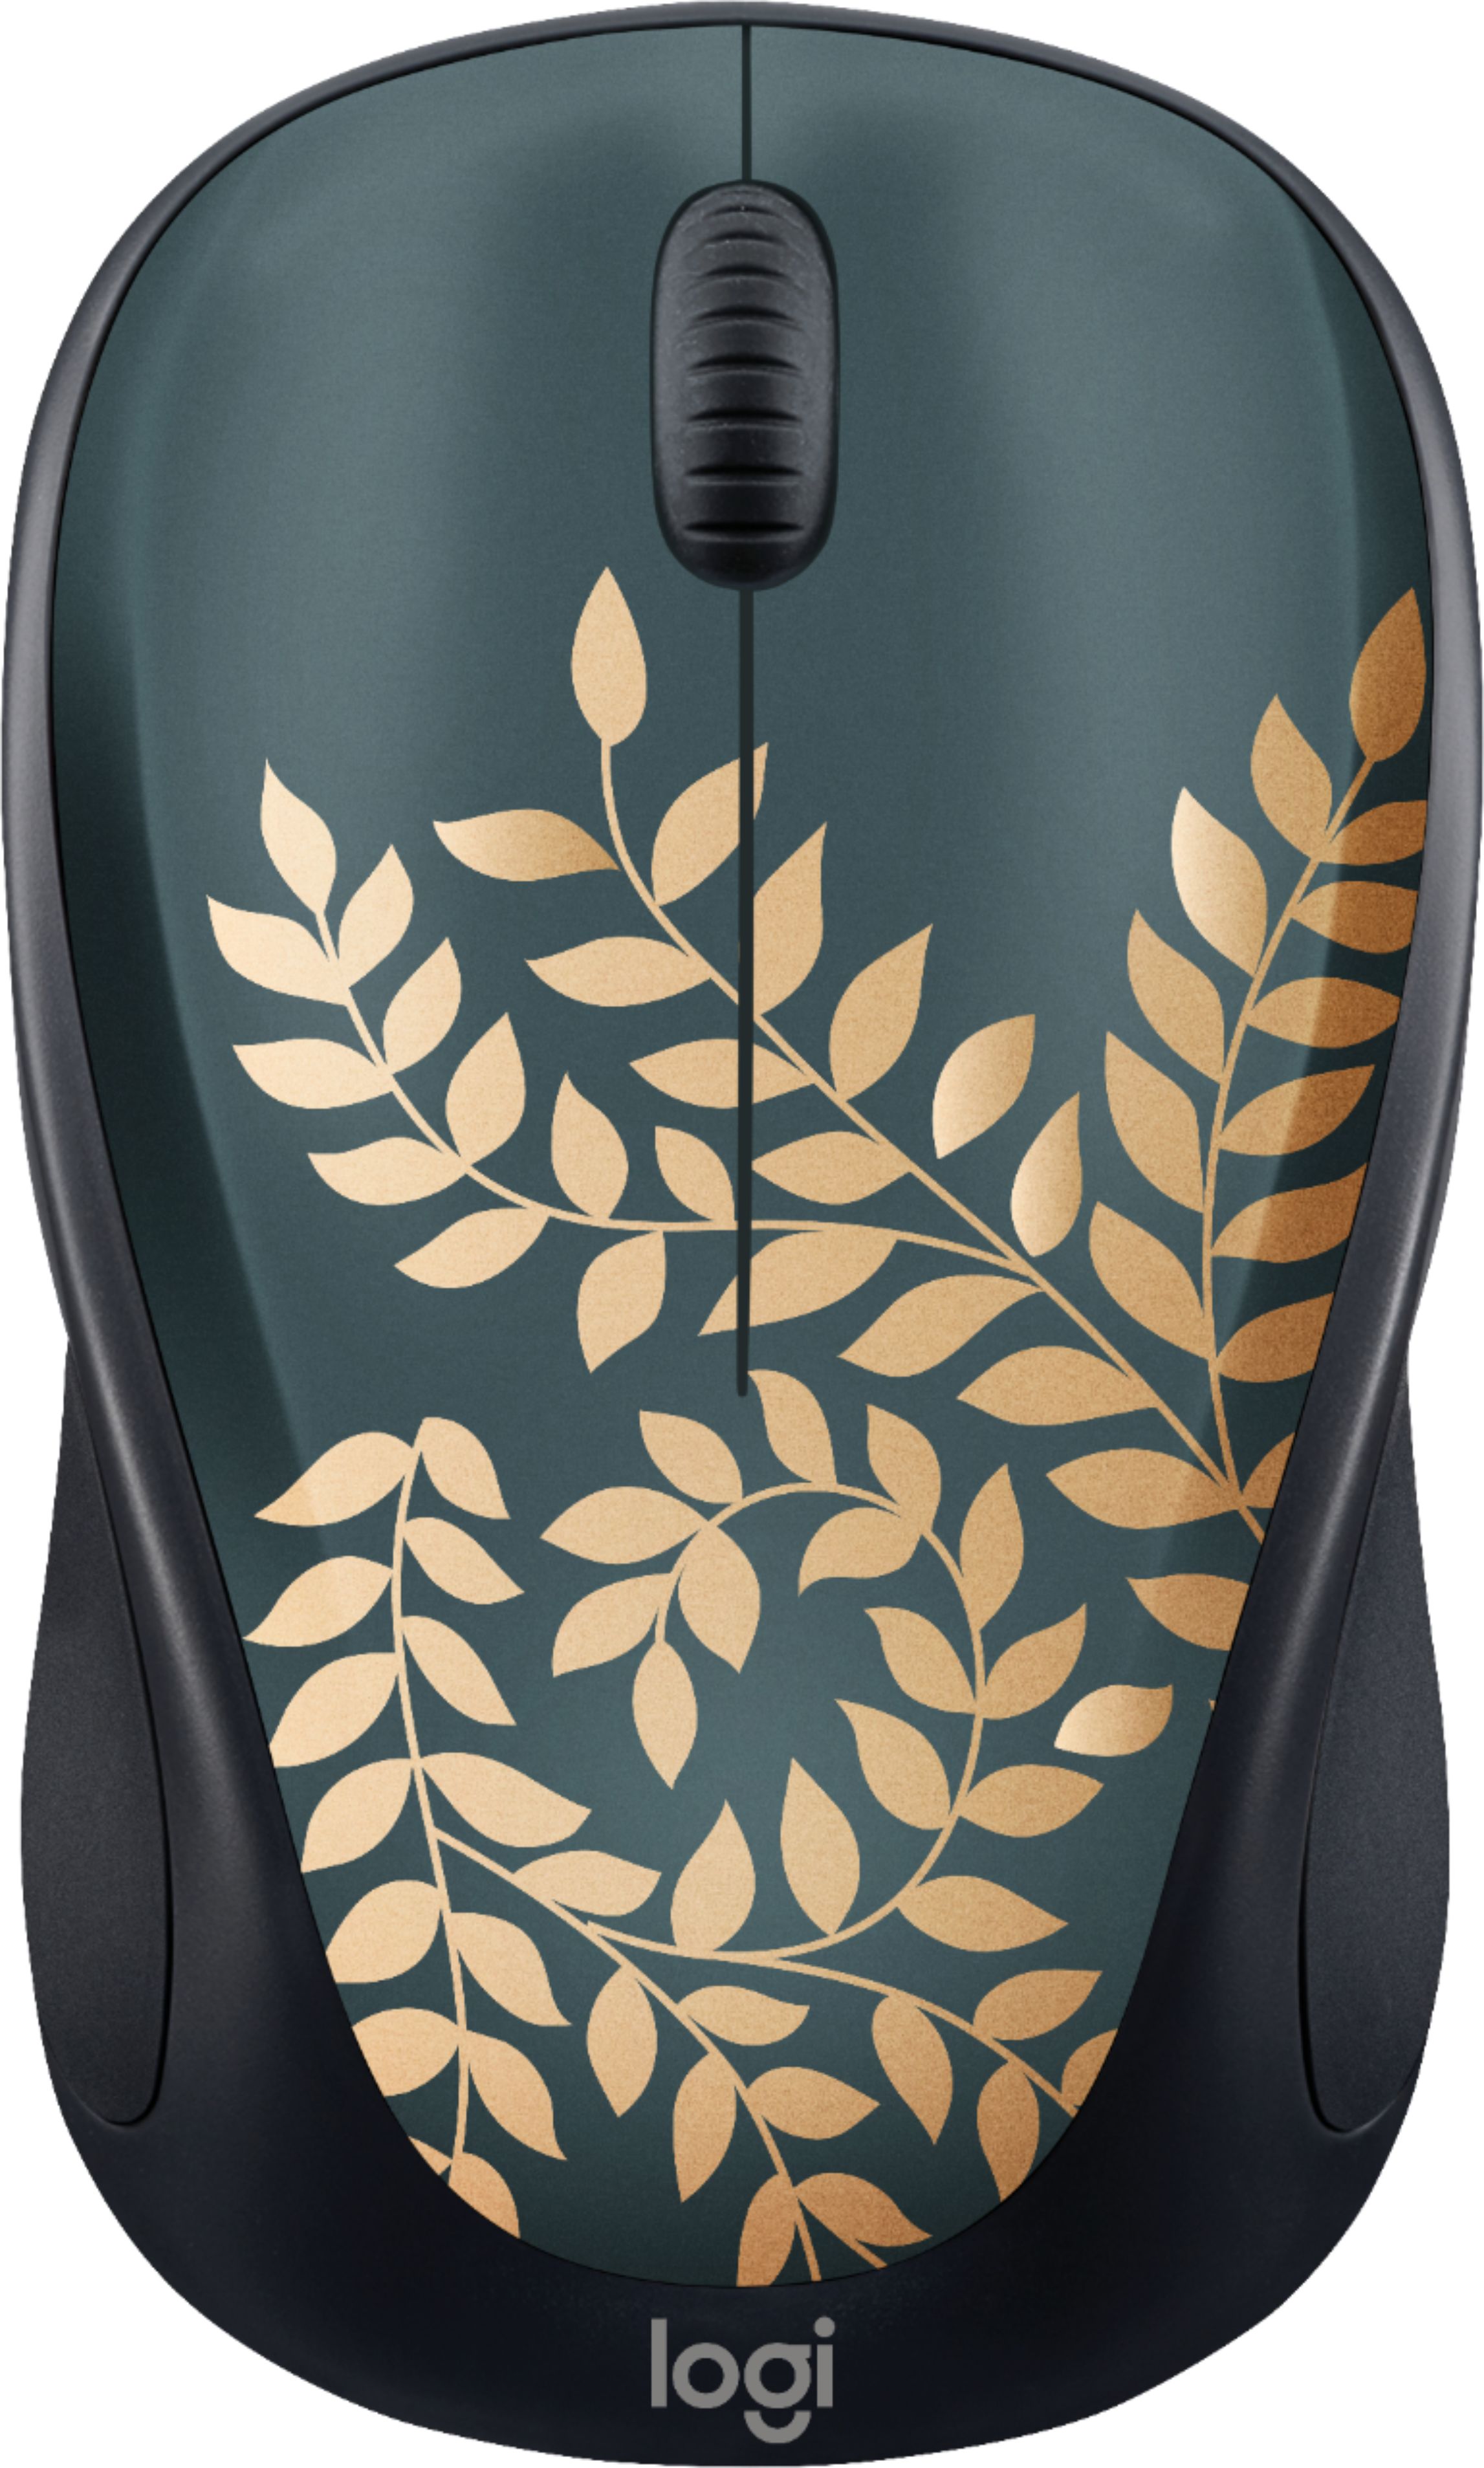 Design Collection Limited Edition Wireless 3-button Ambidextrous with Colorful Golden Garden 910-006117 - Best Buy